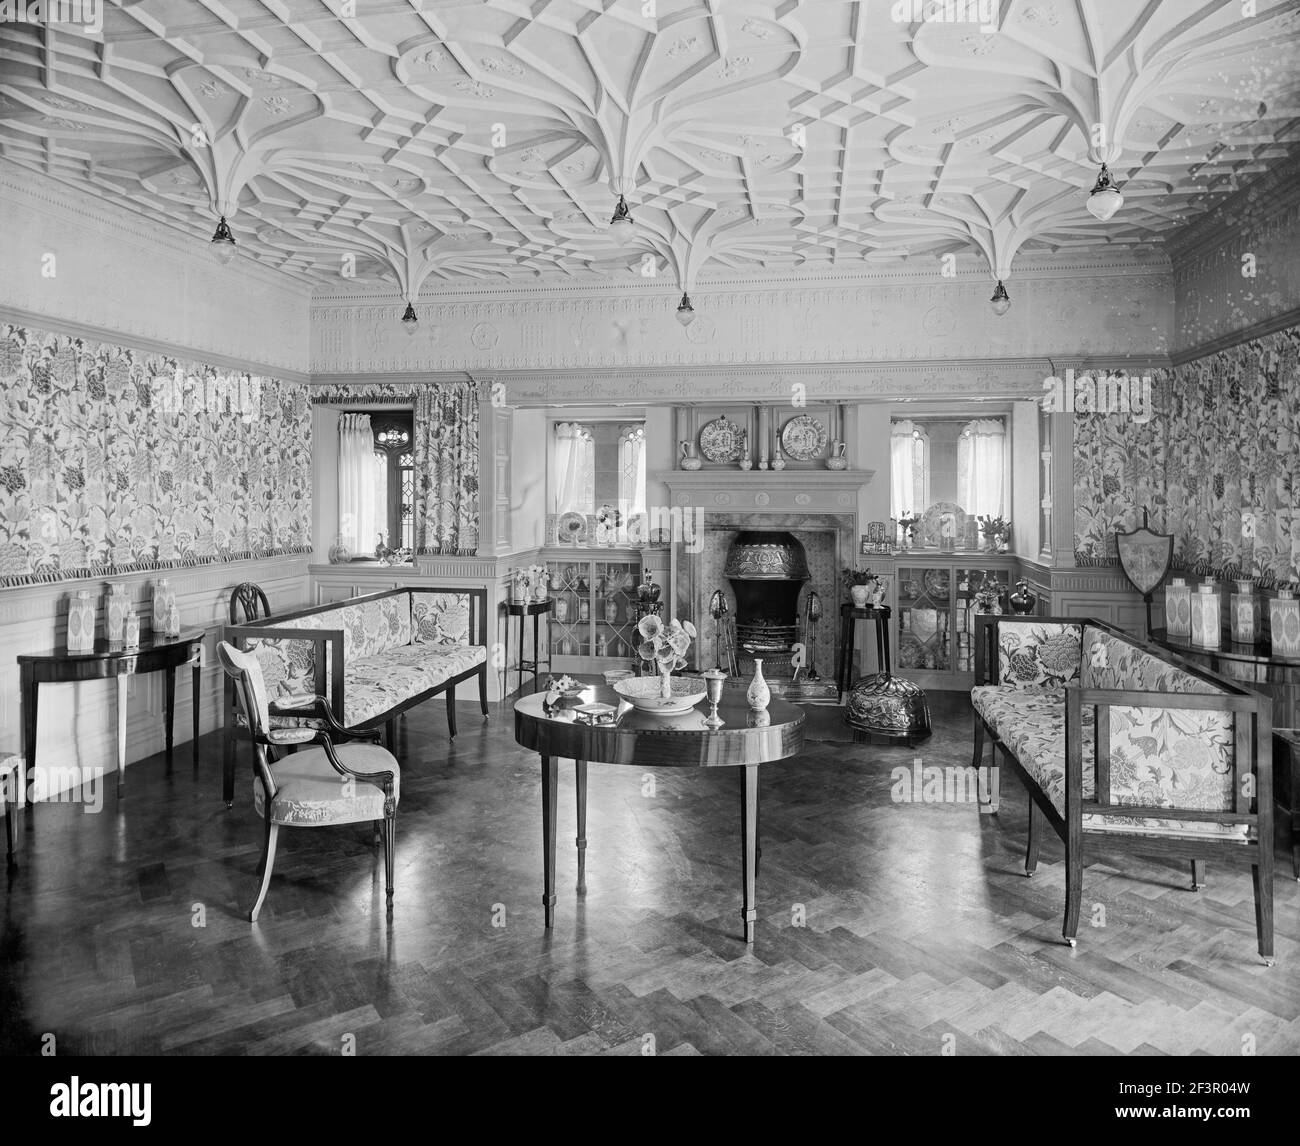 Bidston Court, Birkenhead. Victorian interior of the drawing room looking towards the windows and fireplace. Bidston Court was built in 1891 by the Li Stock Photo